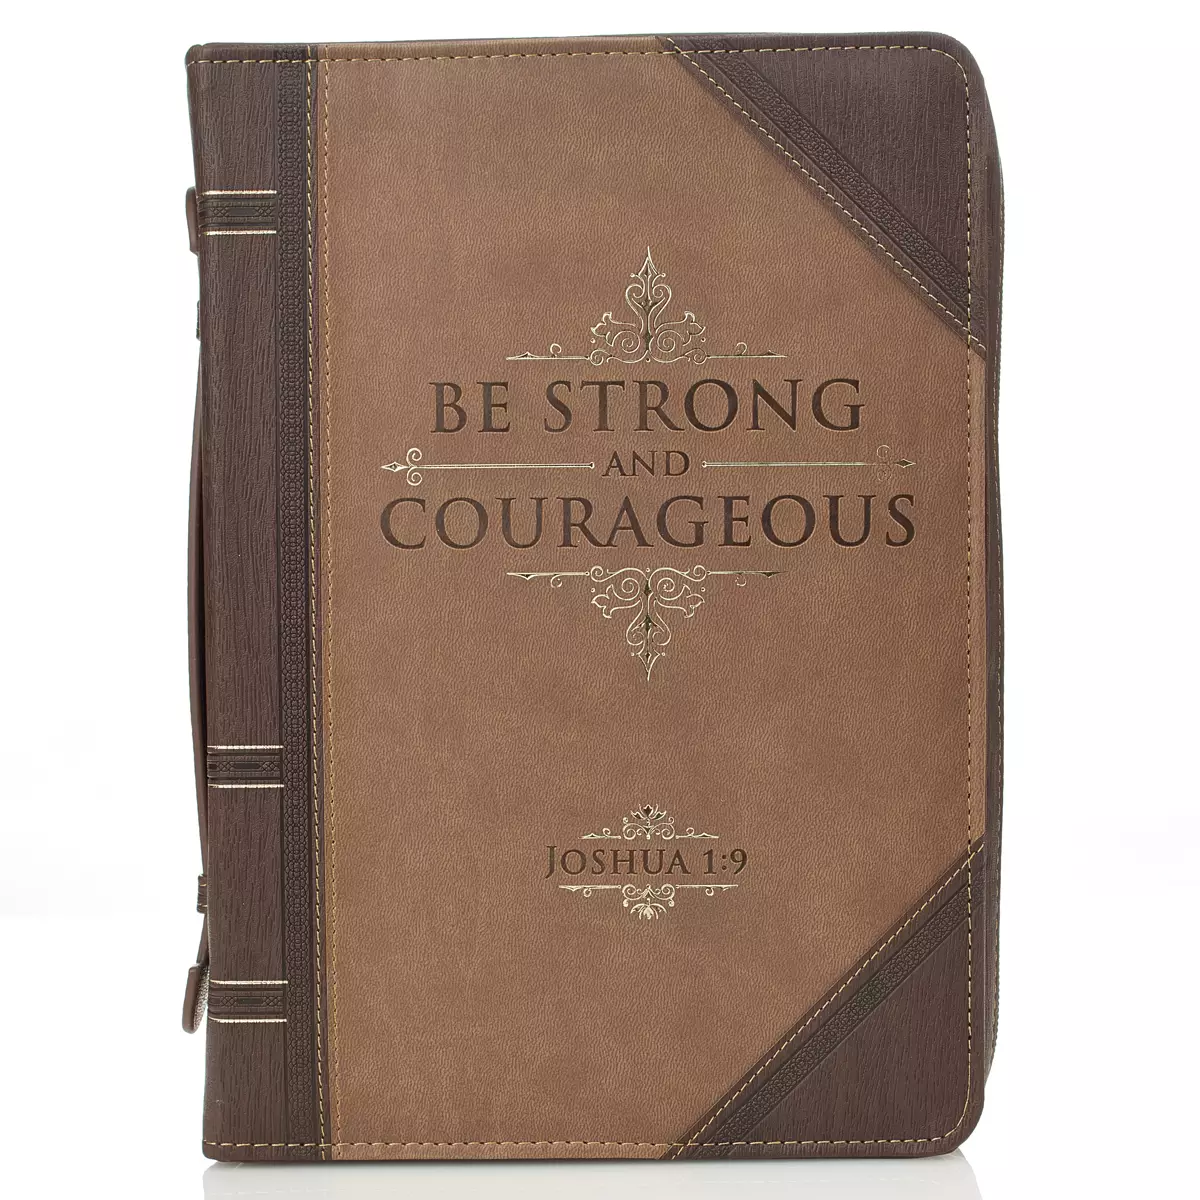 Large Antique Book "Be Strong & Courageous" Bible Cover - Joshua 1:9